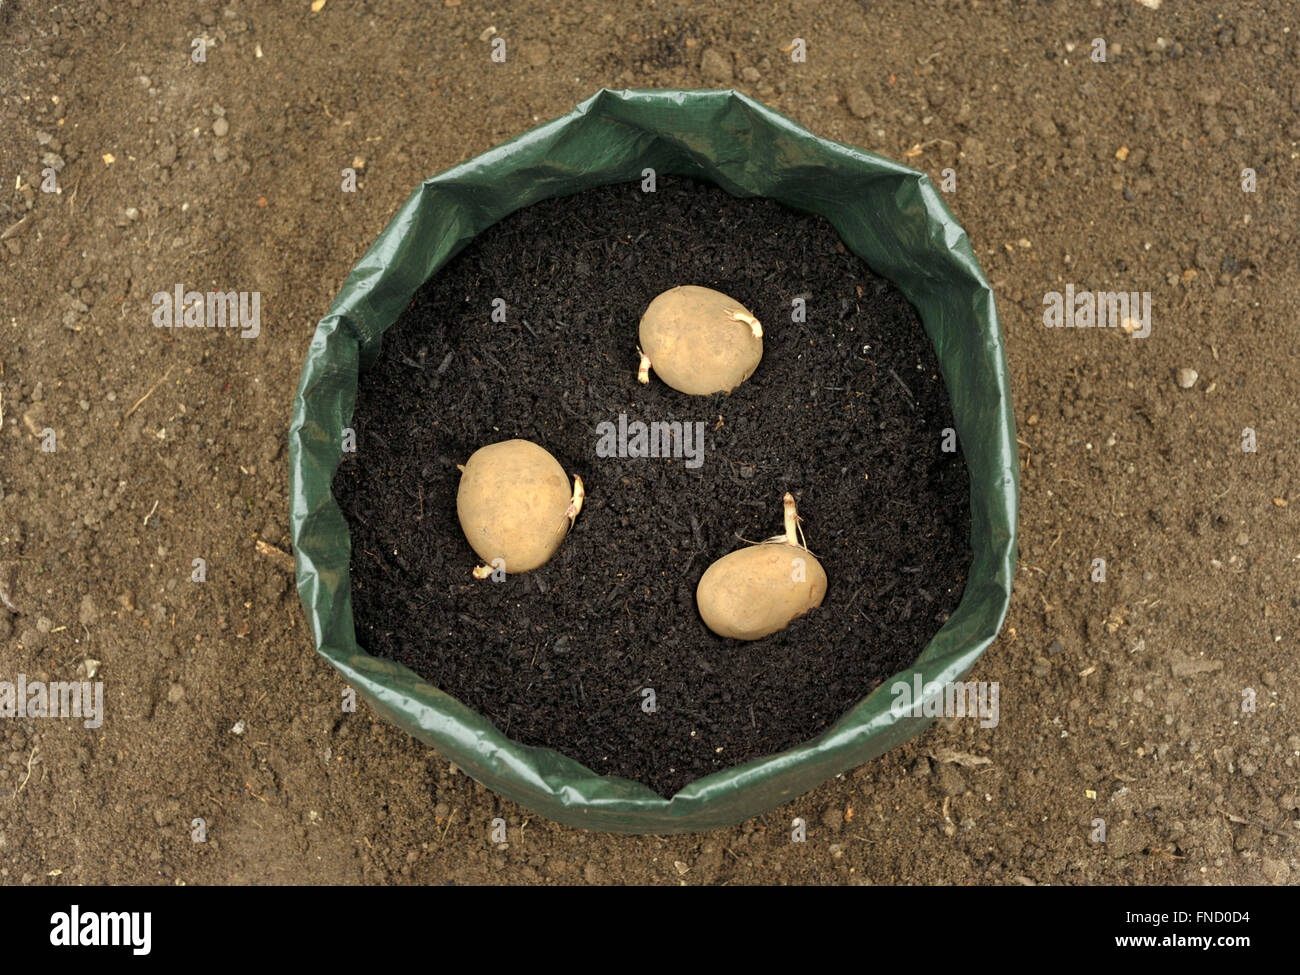 https://c8.alamy.com/comp/FND0D4/planting-seed-potatoes-in-a-growing-bag-container-of-compost-for-space-FND0D4.jpg